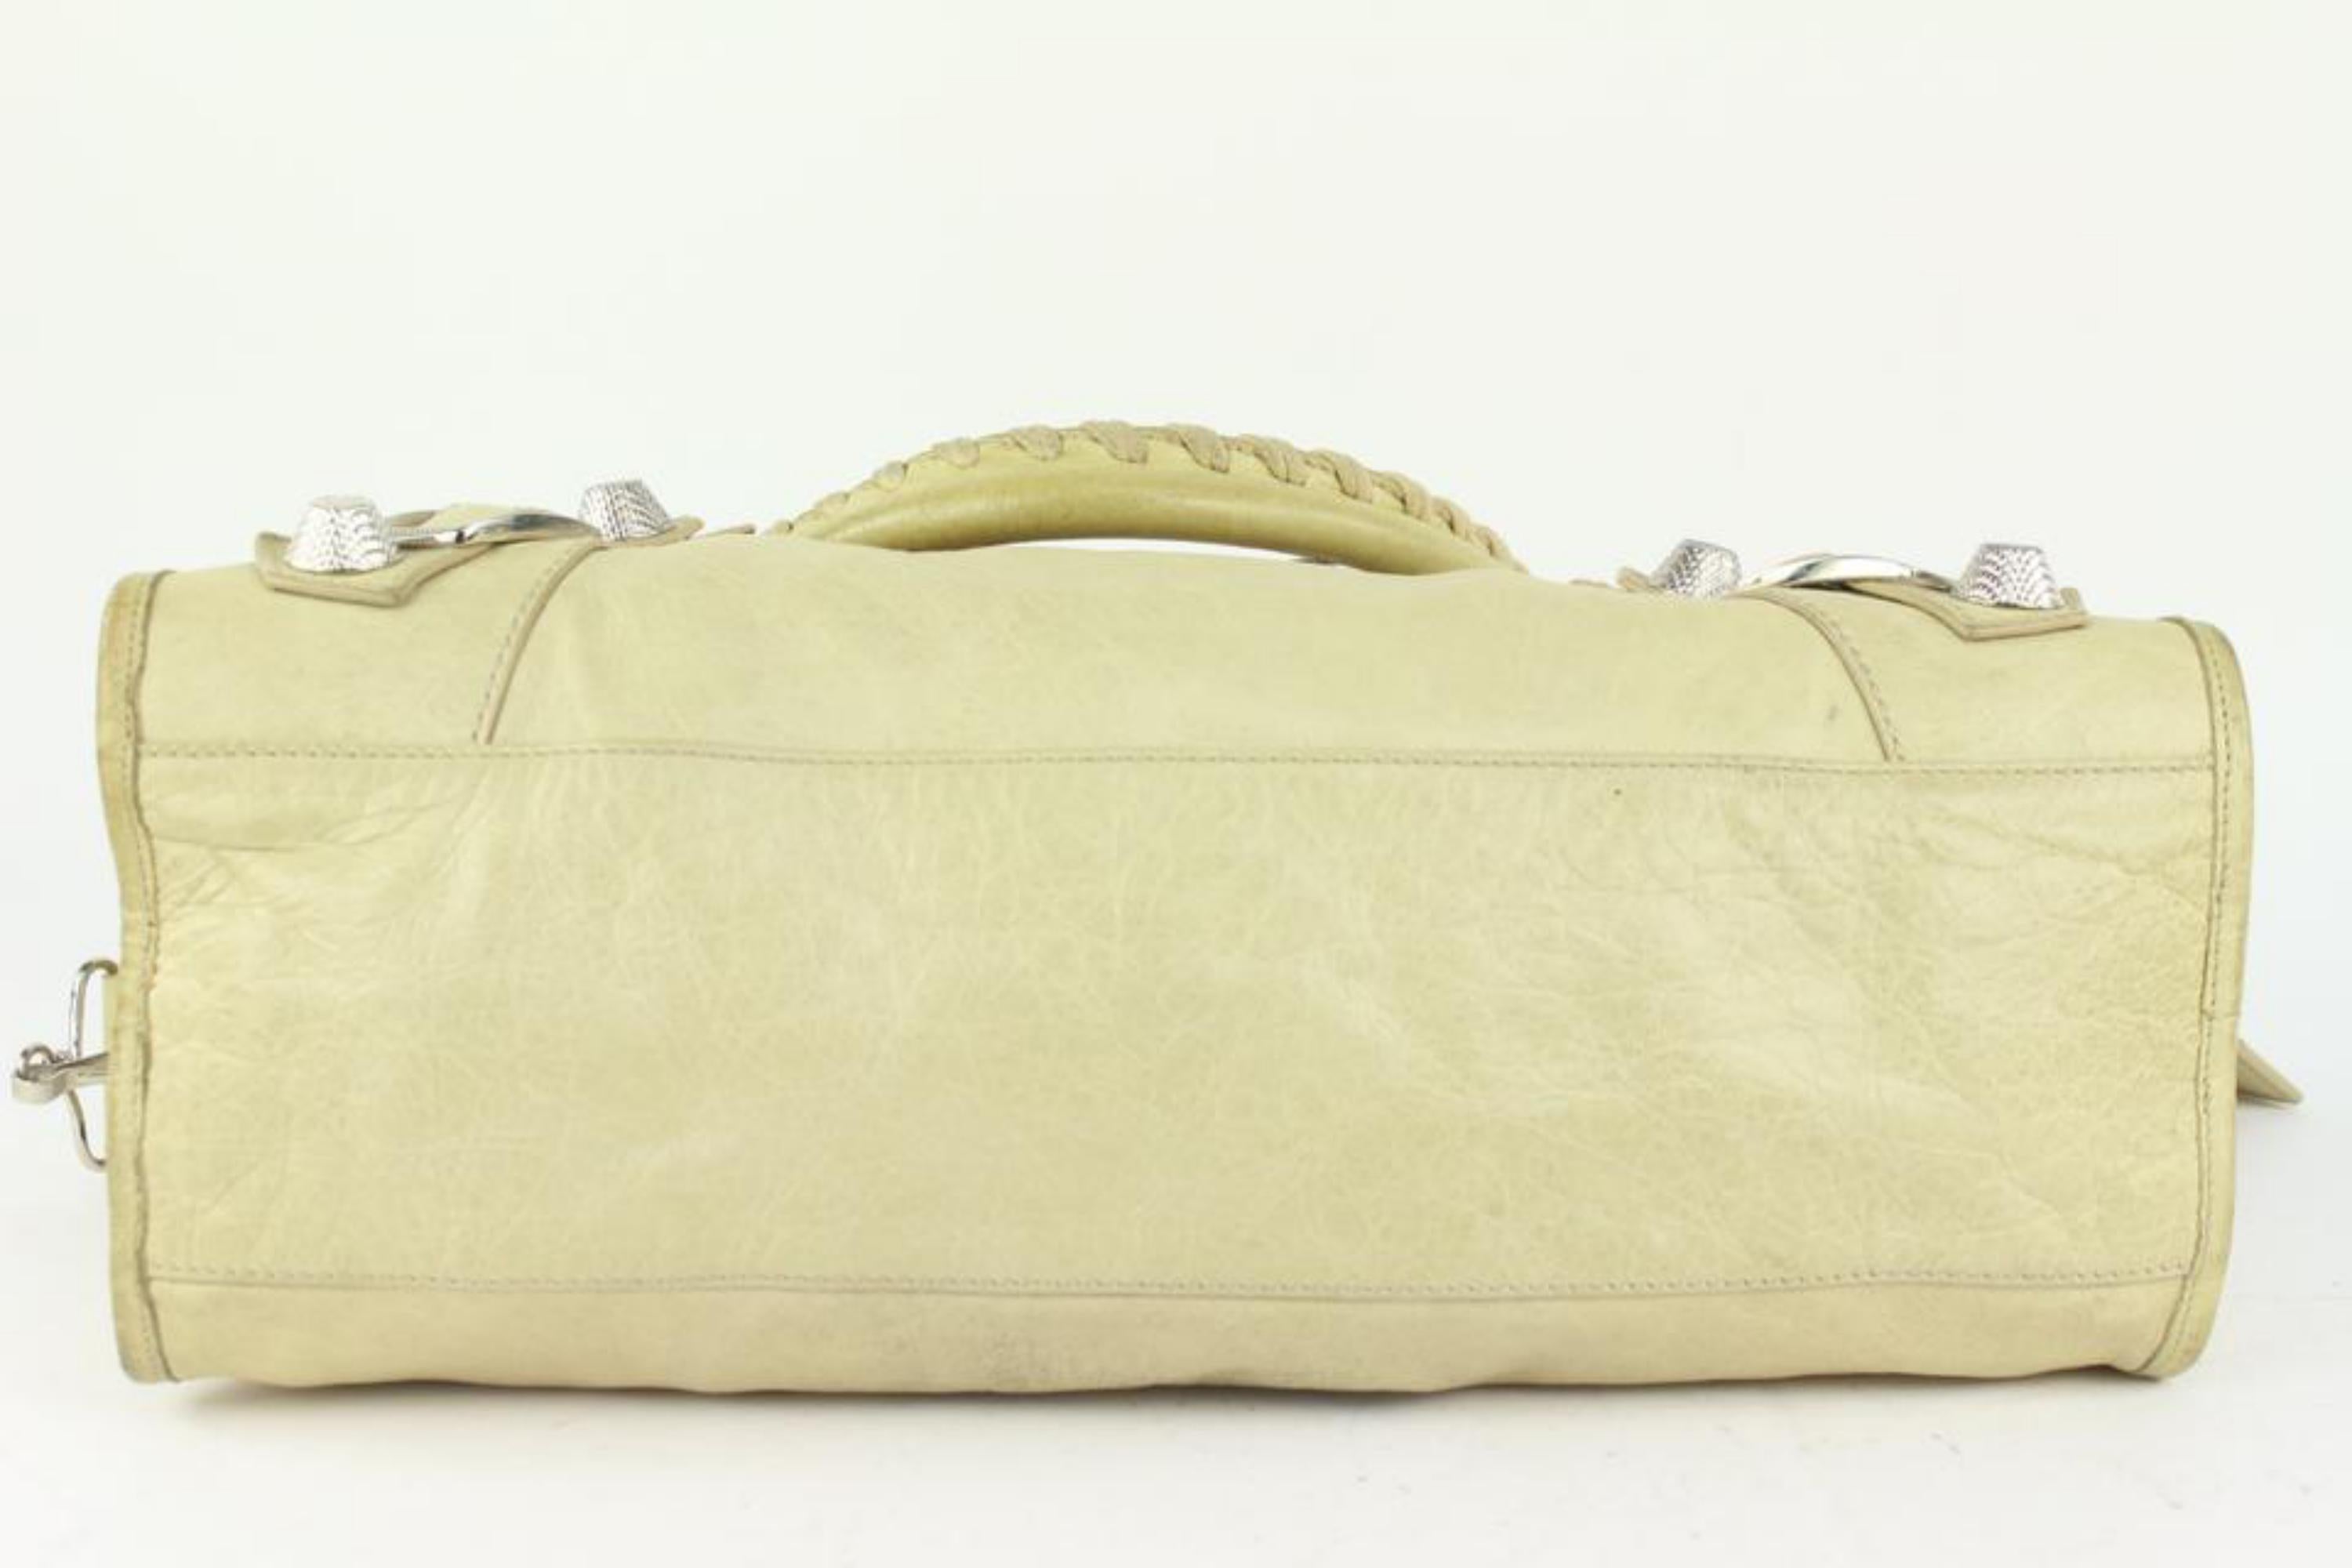 Balenciaga Cream Agneau Leather Giant 21 Silver Hardware City Bag 1BAL1020 In Fair Condition For Sale In Dix hills, NY